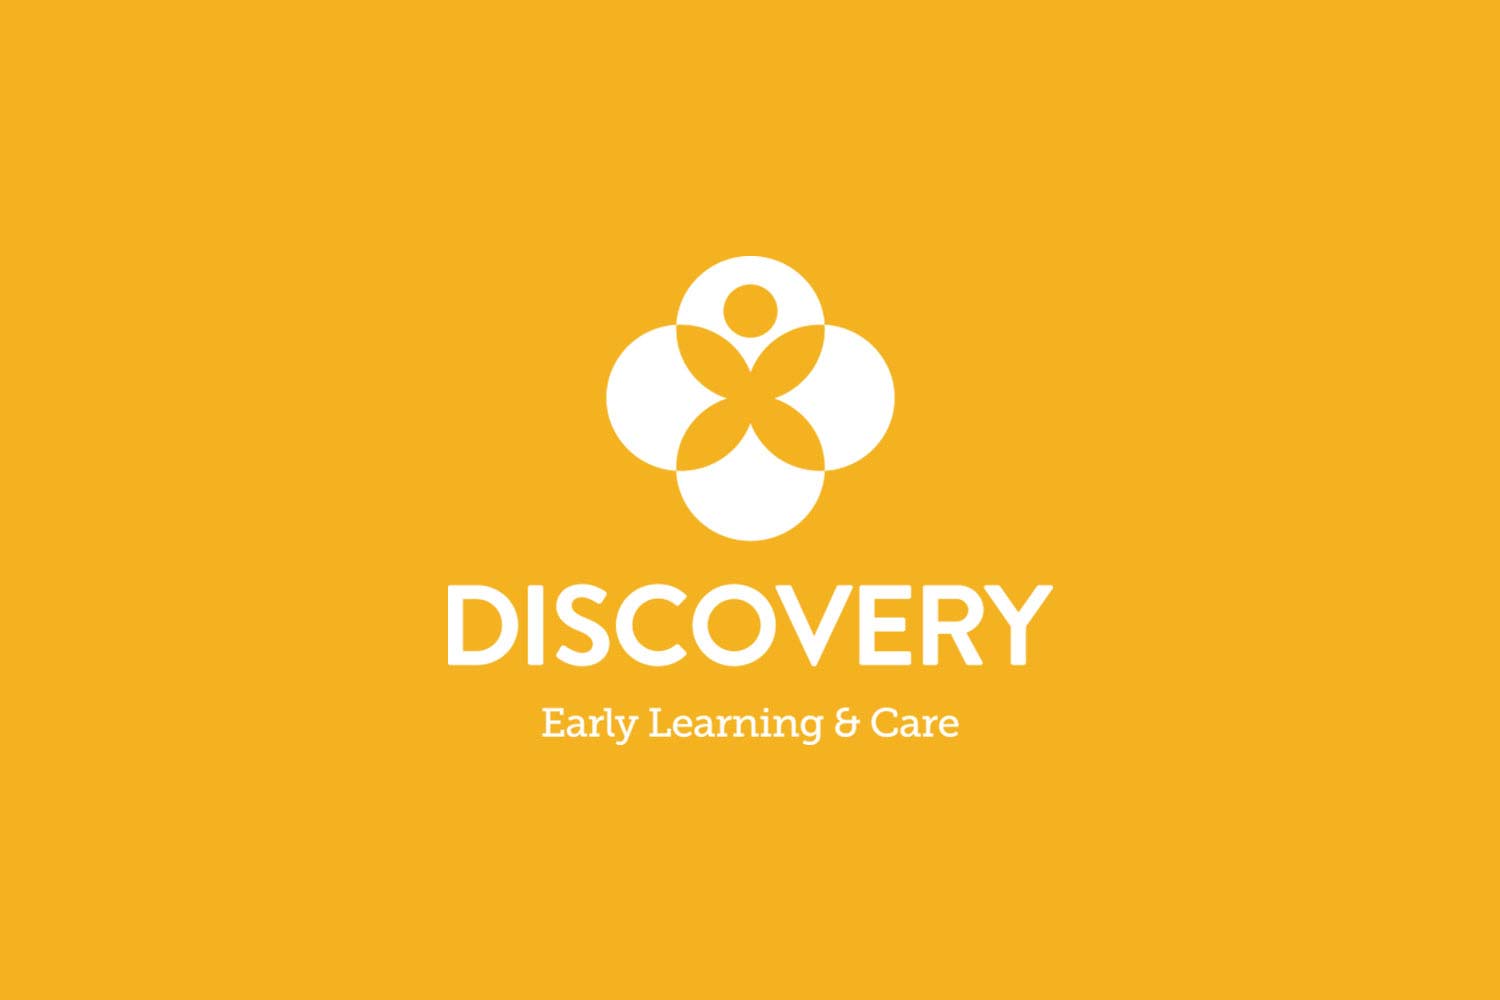 Discovery Early Learning & Care